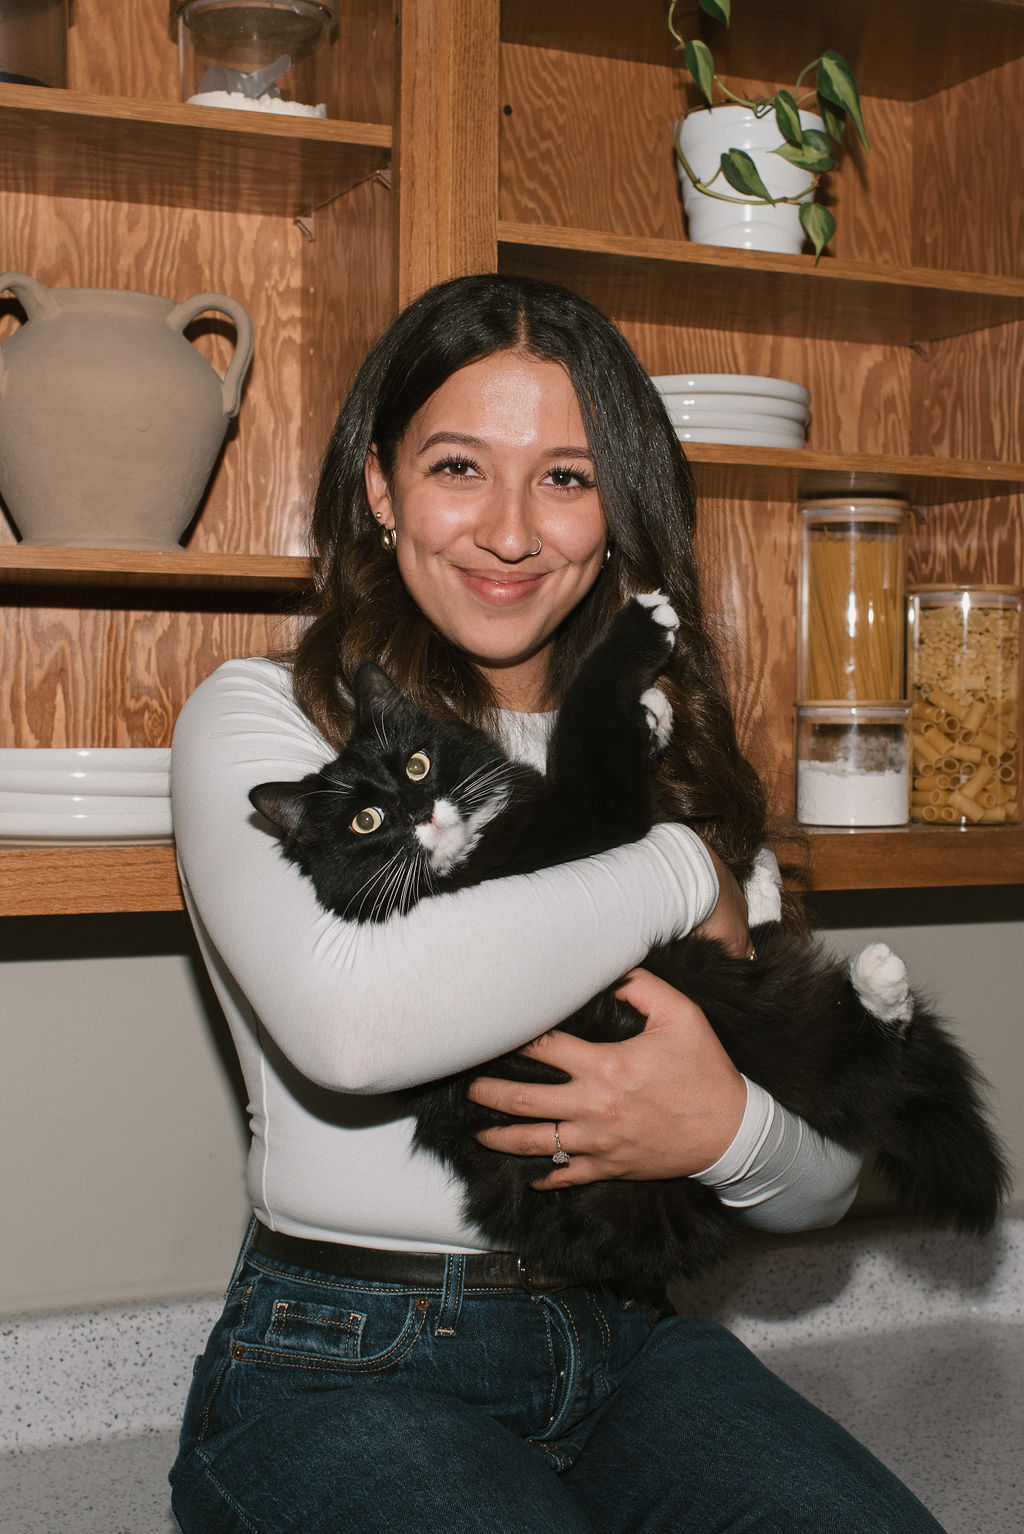 bride to be holding her cat and sitting on her kitchen counter